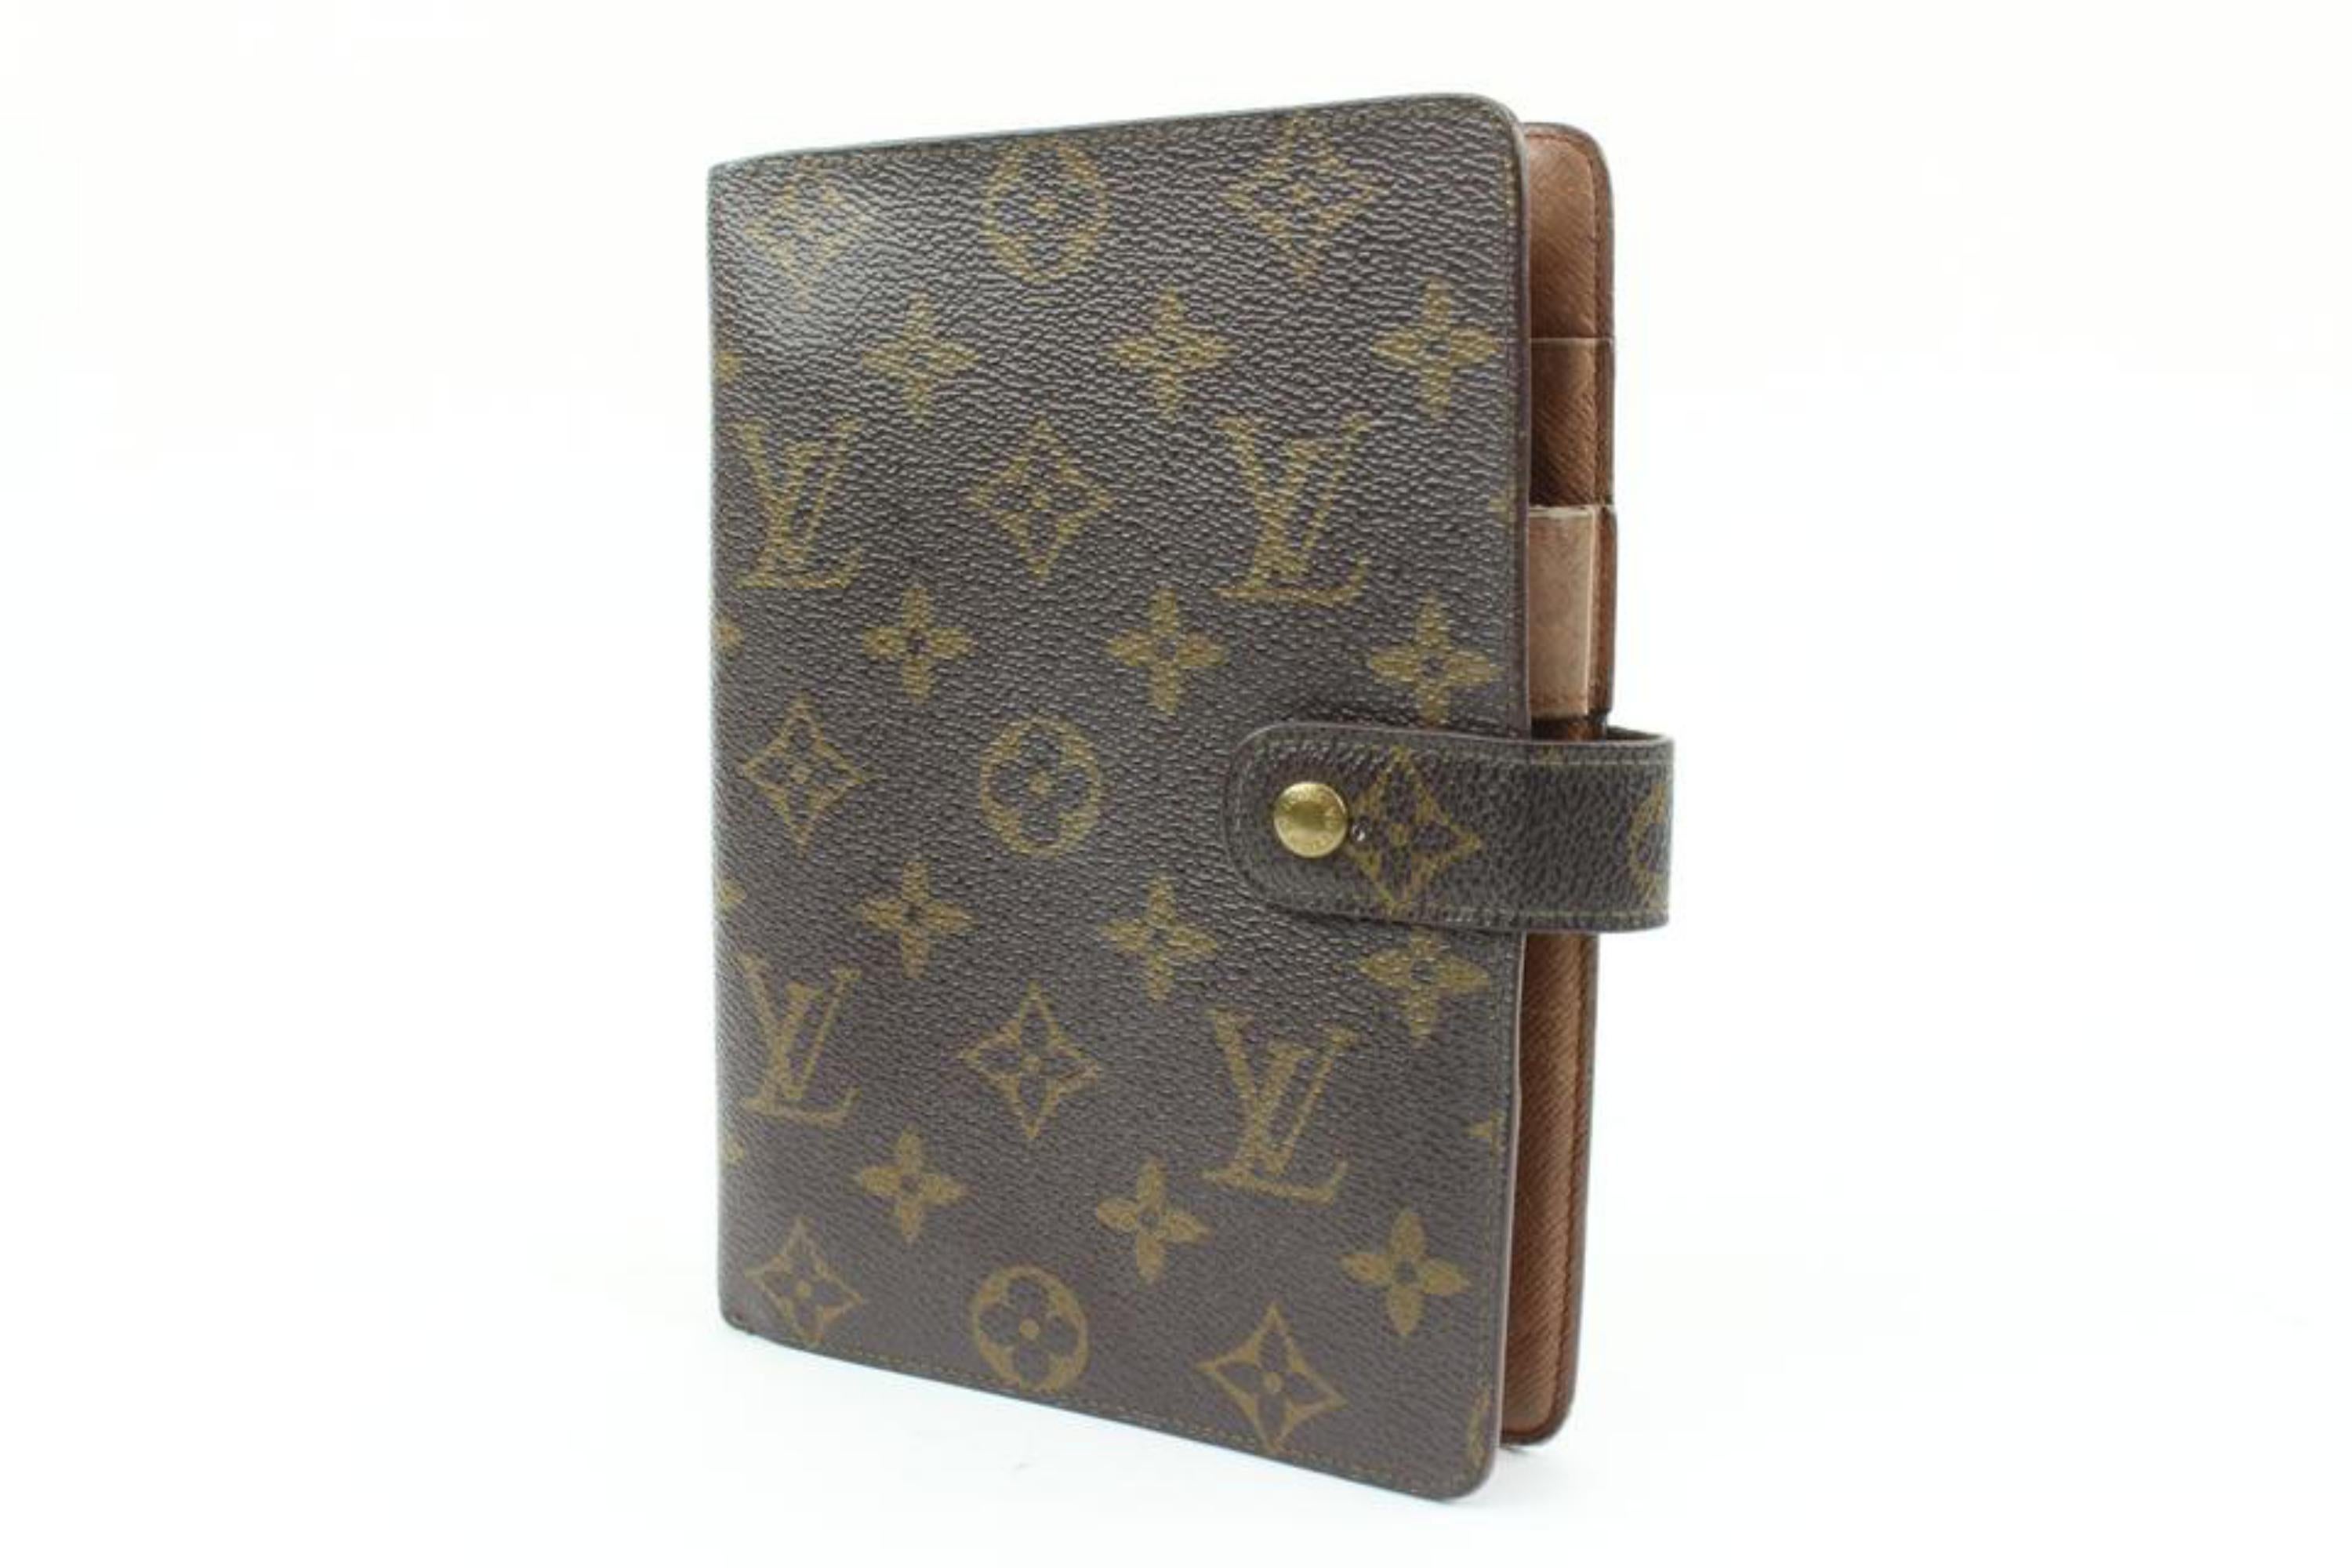 Louis Vuitton Monogram Agenda MM Diary Planner Cover s28lv14
Date Code/Serial Number: SP0973
Made In: France
Measurements: Length:  5